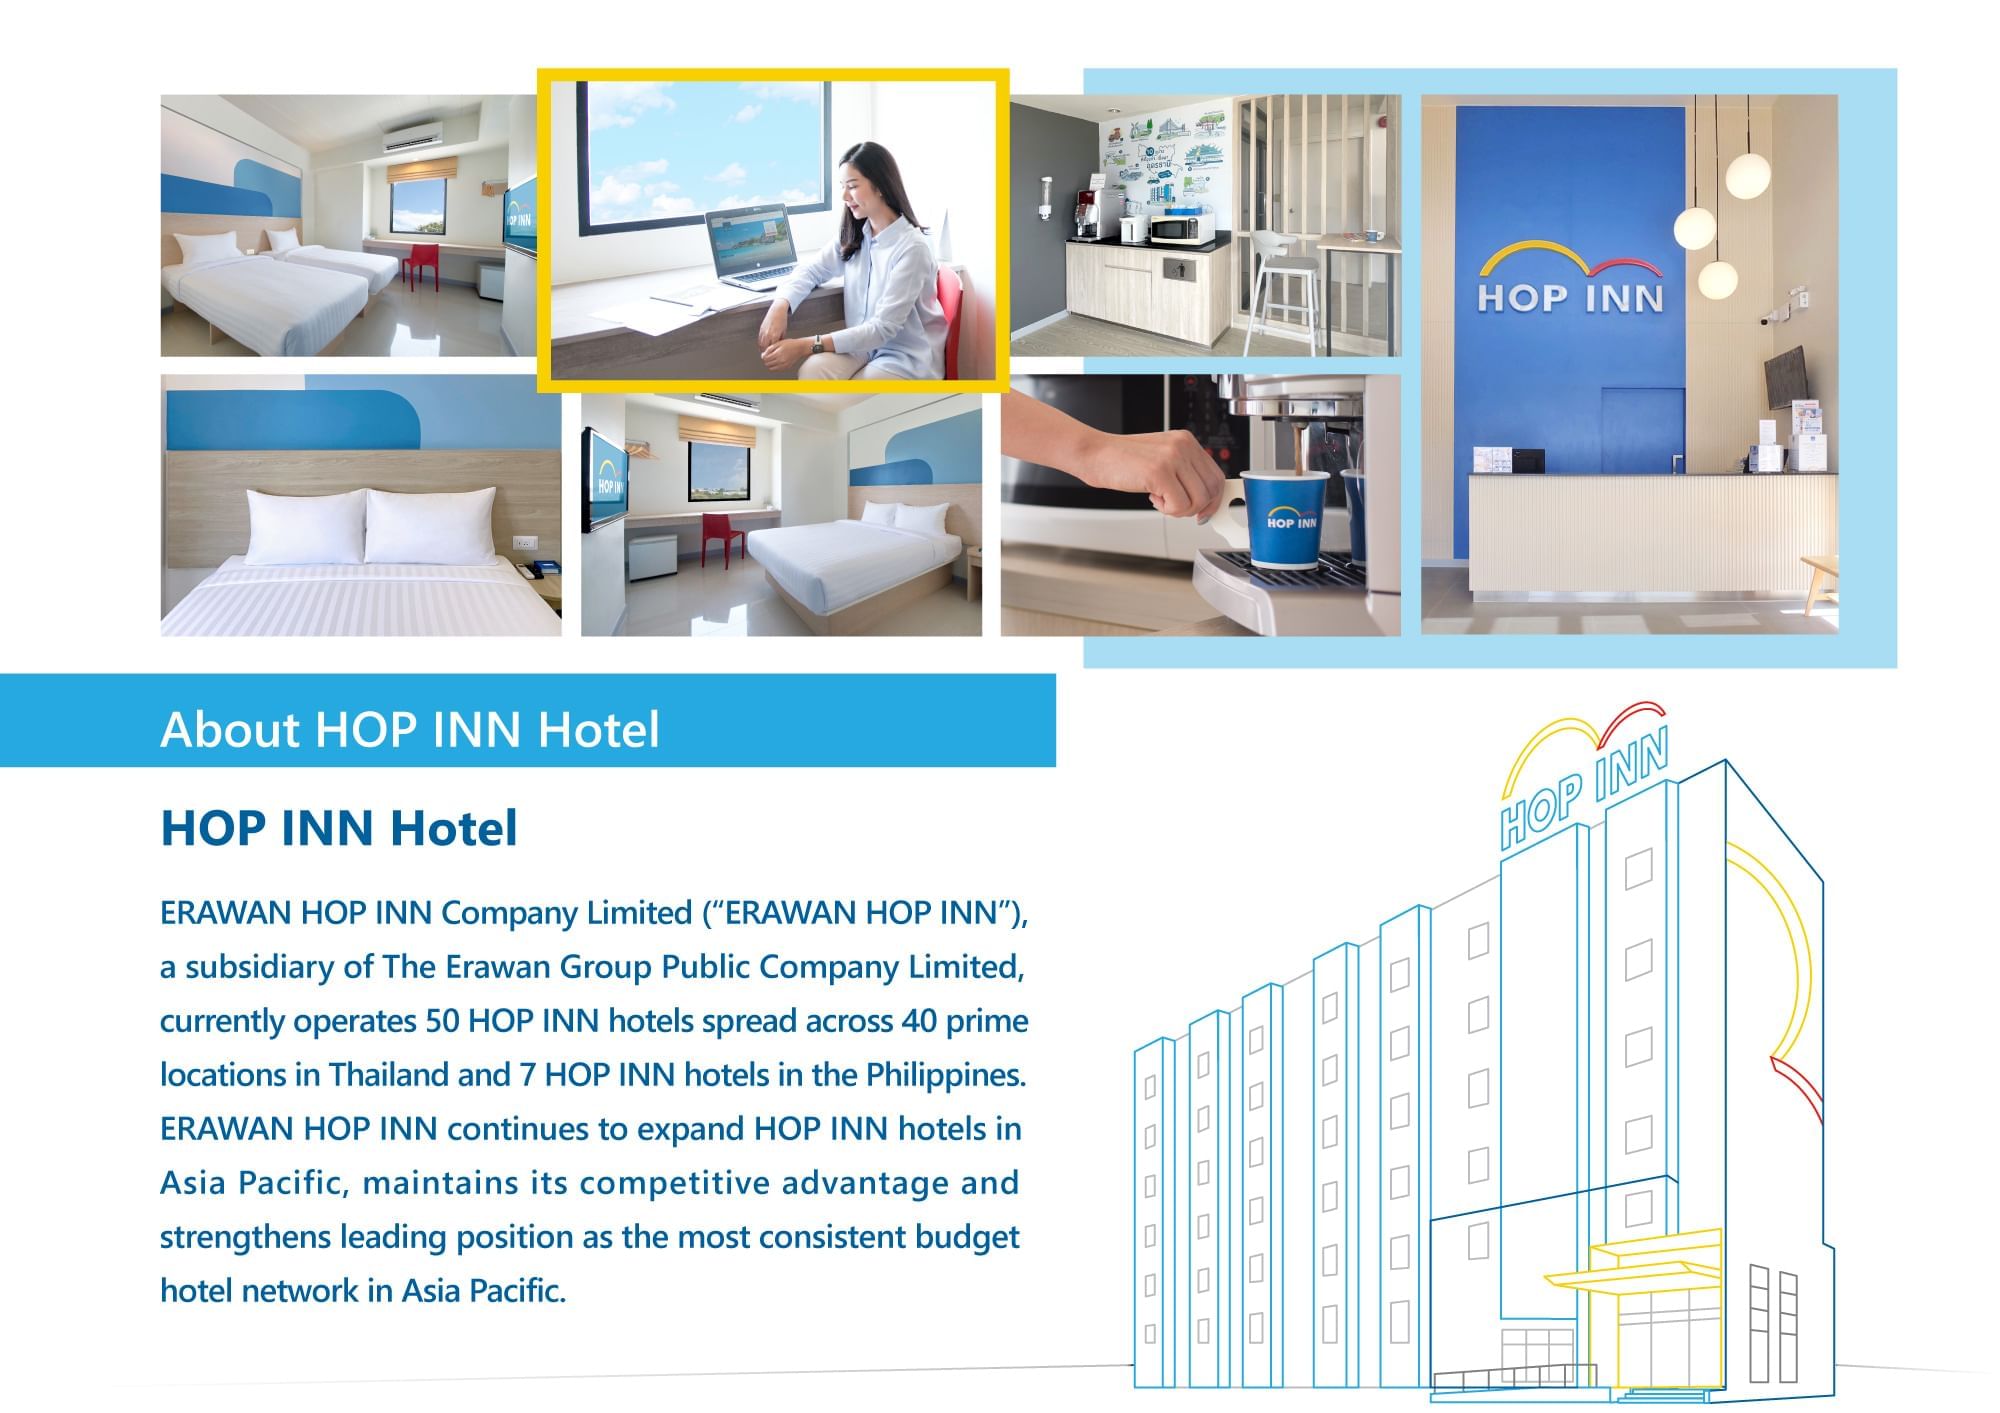  Banner with Hotel collages used at Hop Inn Hotel